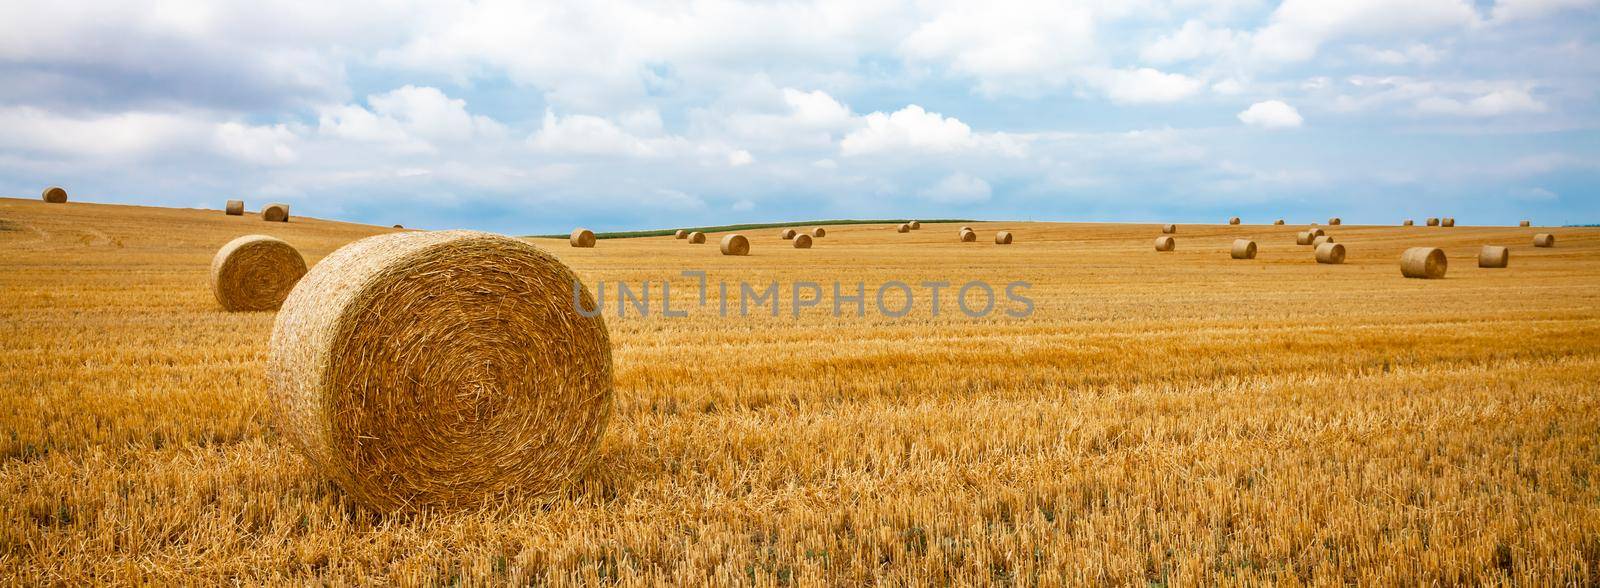 round bales of dry straw on agricultural land.